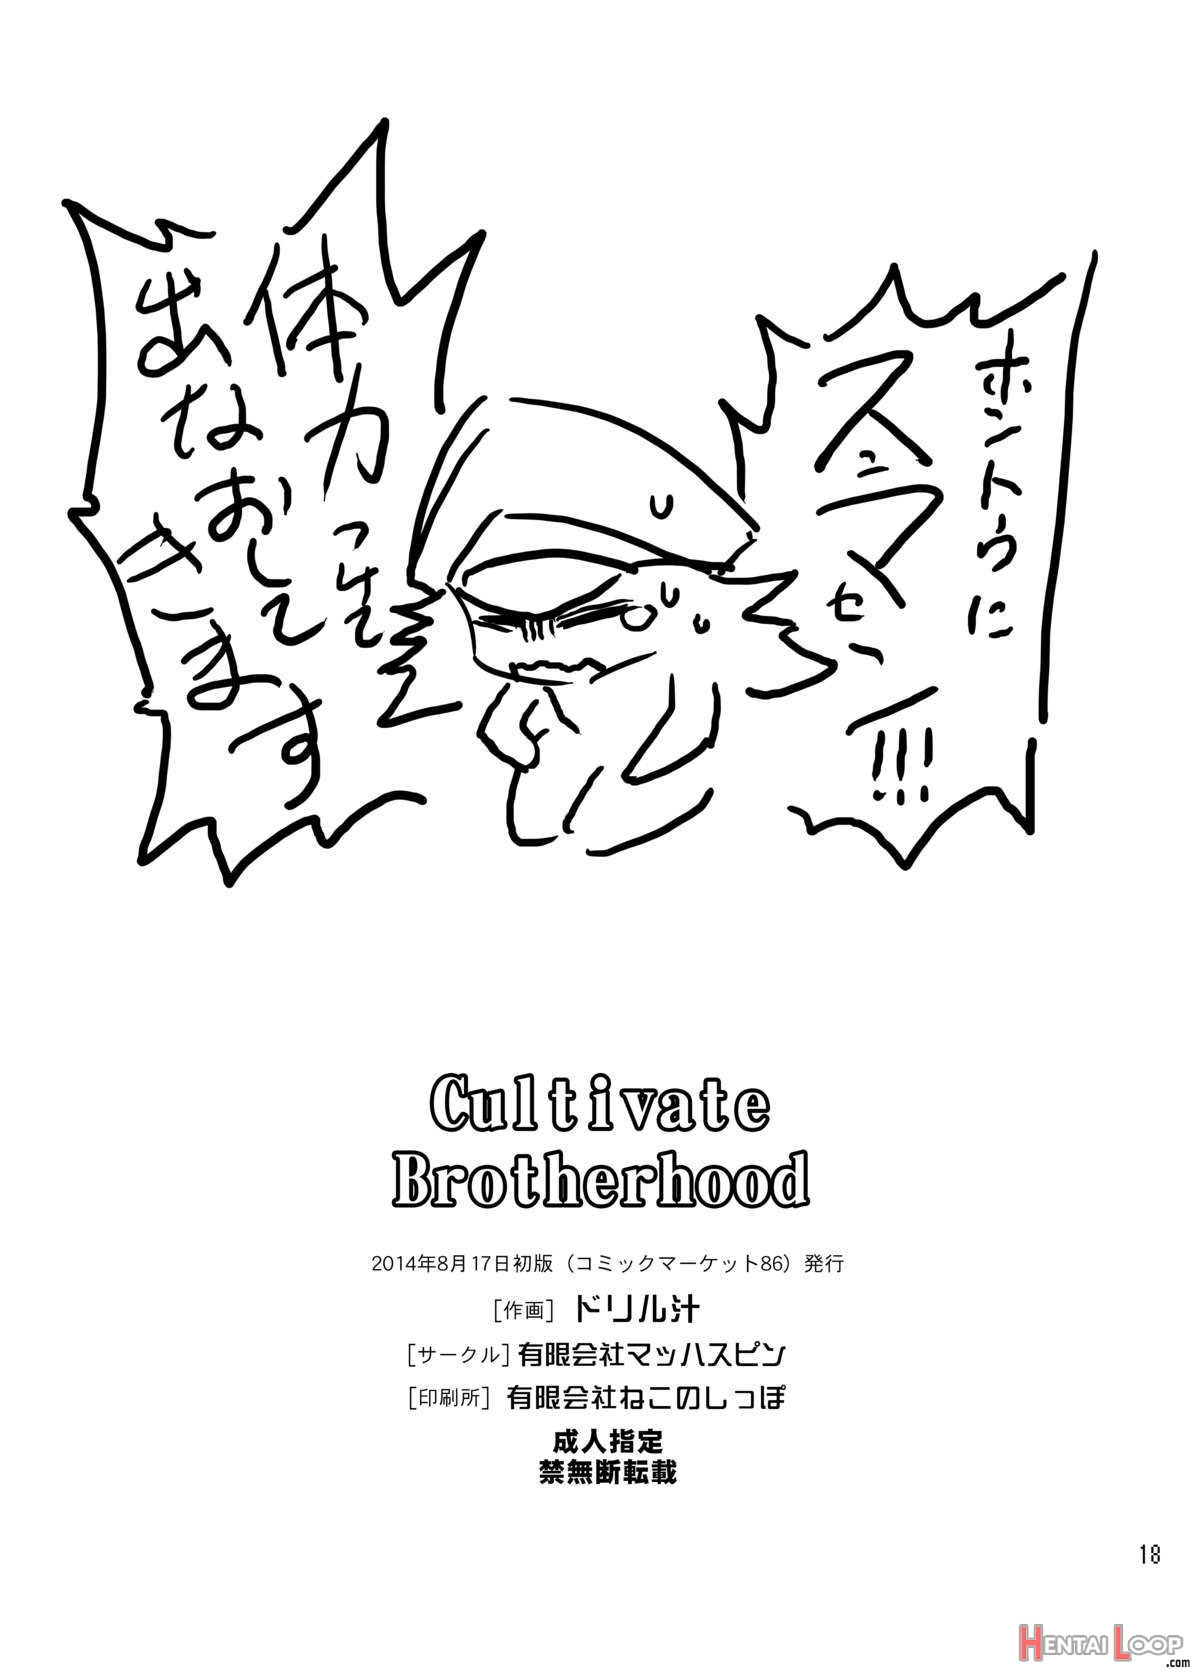 Cultivate Brotherhood page 15